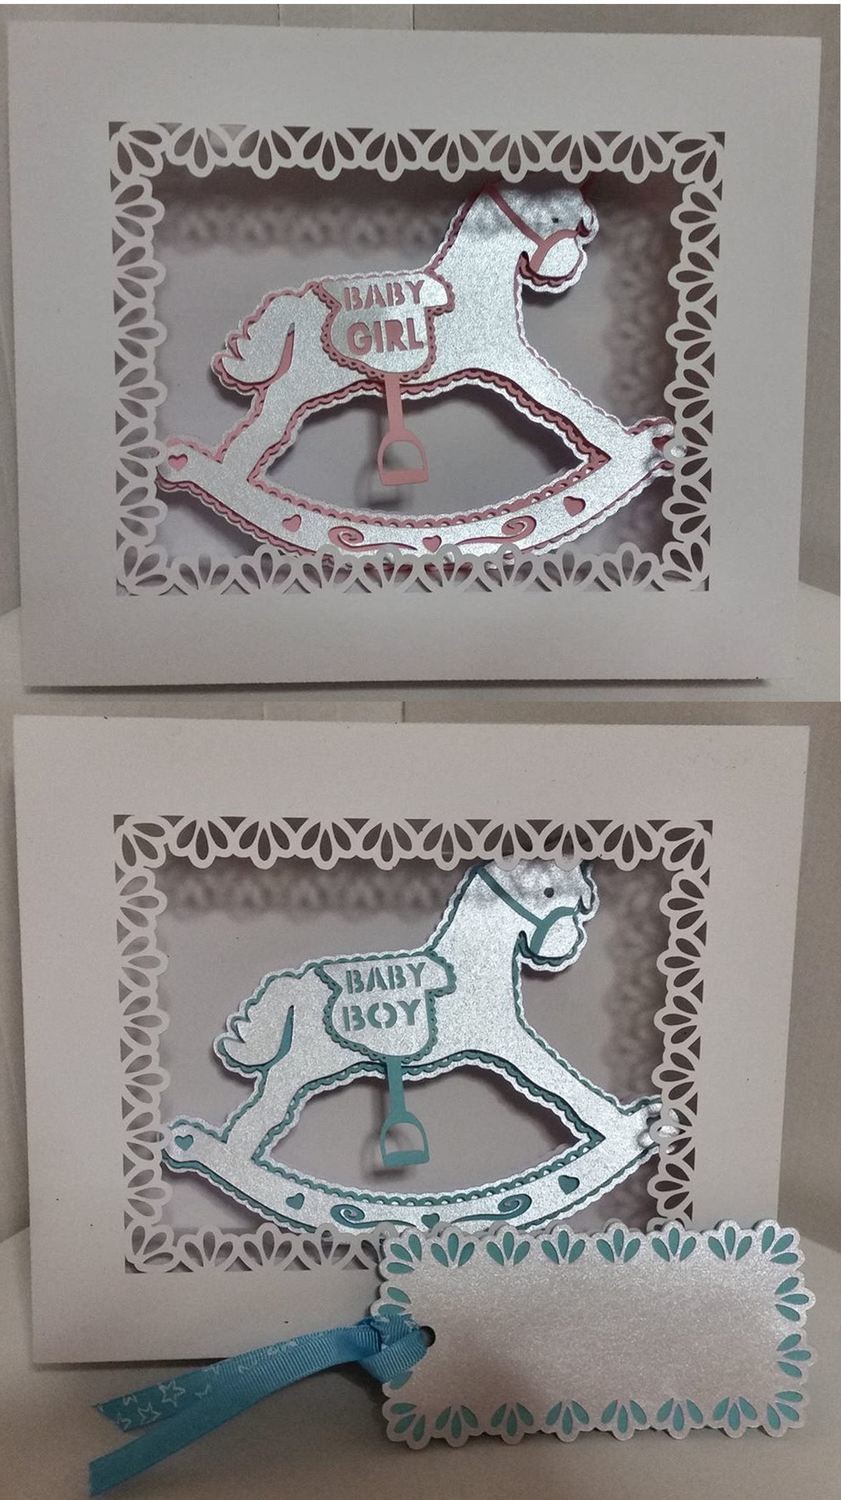 Rocking horse 3D Layered Card Template with display box